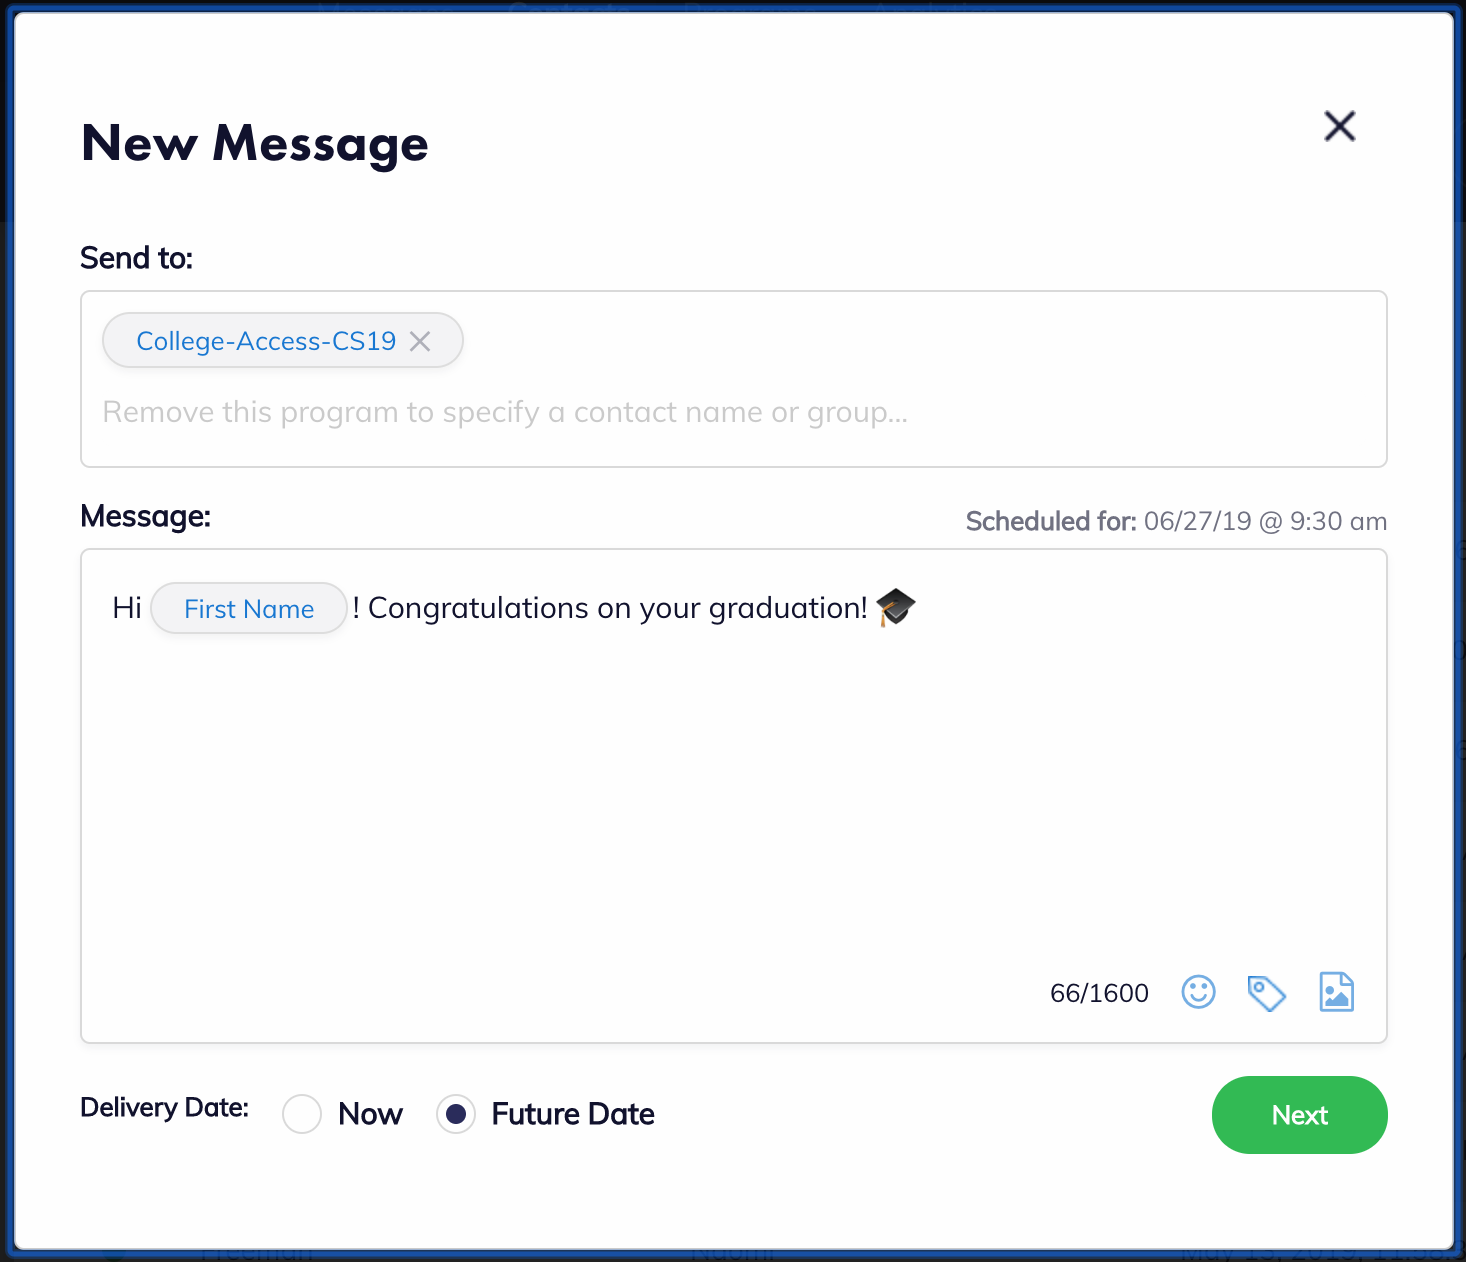 Image of the bulk message box, with the schedule for a future date option selected.